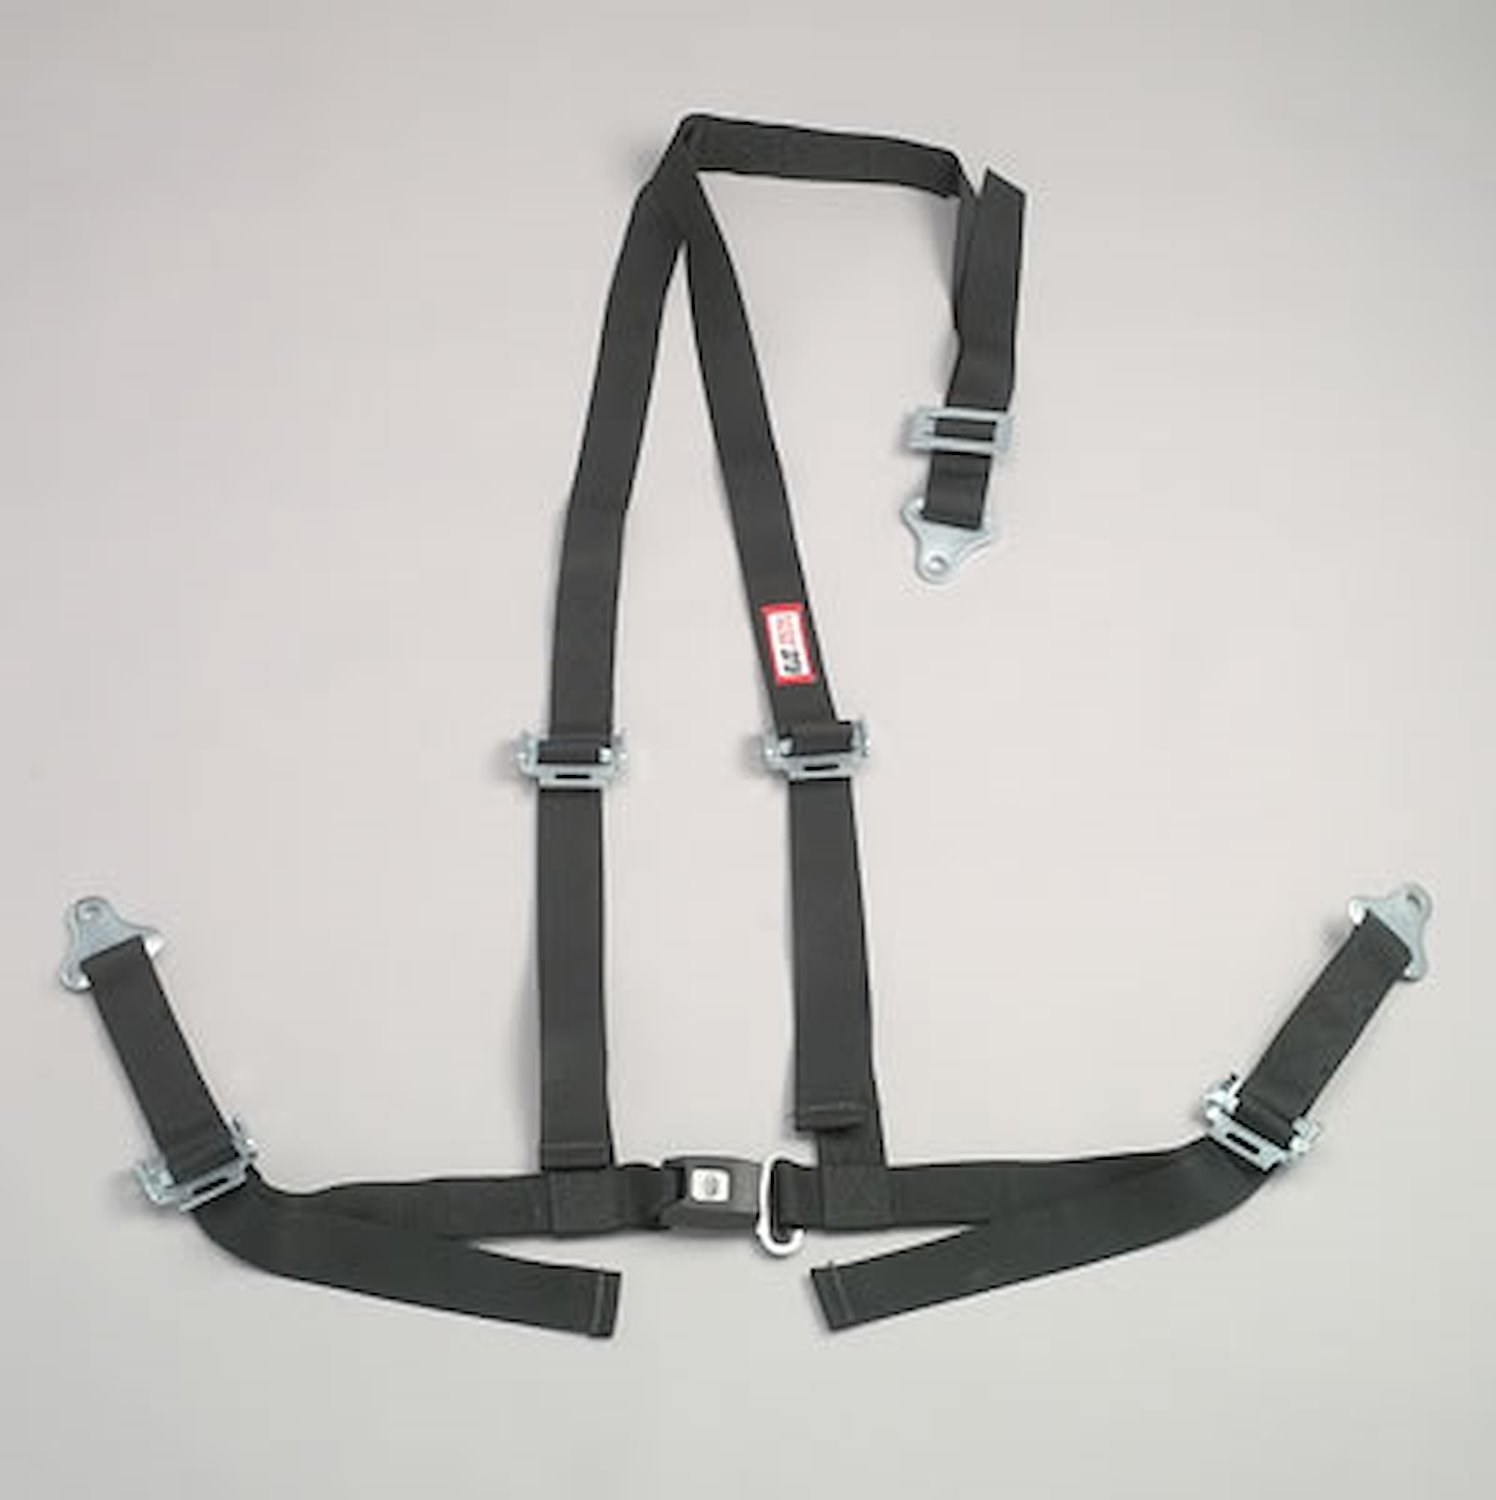 NON-SFI B&T HARNESS 2 PULL UP Lap Belt 2 S. H. Individual ROLL BAR Mount ALL WRAP ENDS OD GREEN